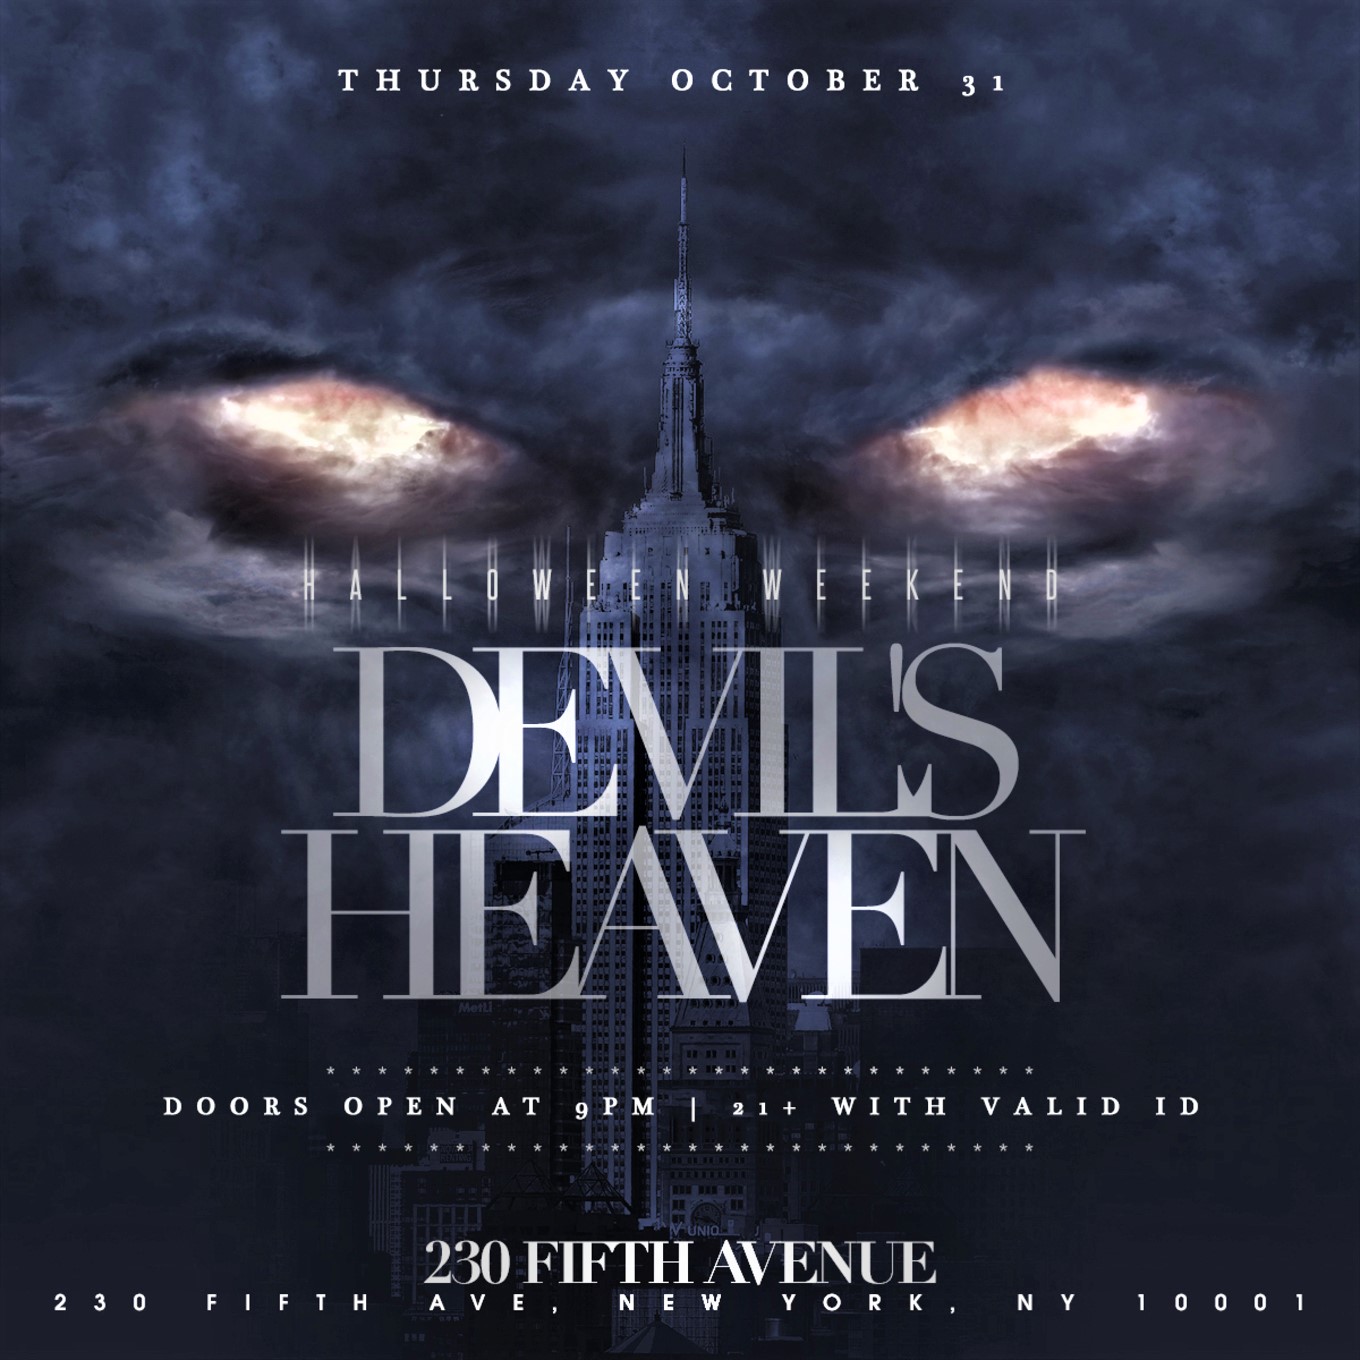 Halloween 2021 devils heaven rooftop party ny cropped.jpg